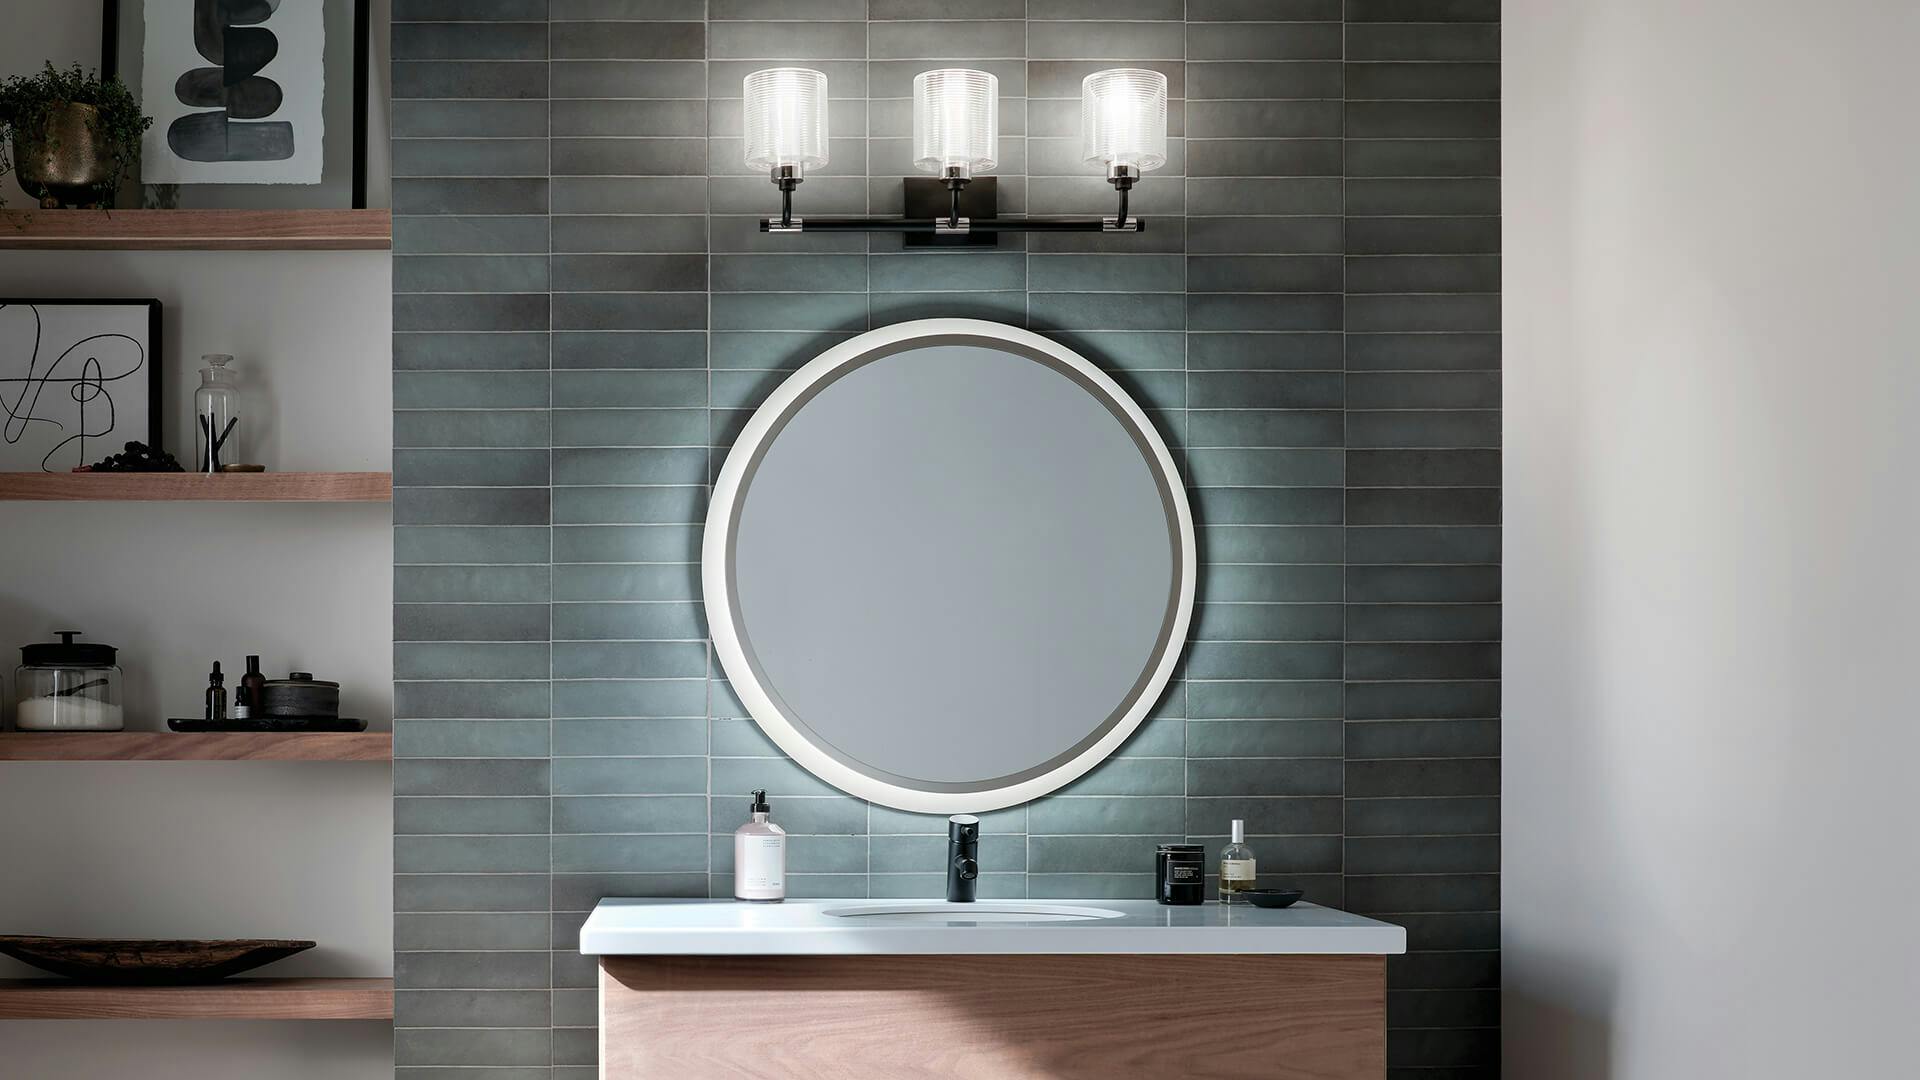 Bathroom with round LED mirror and Harvan black finish sconce above the mirror